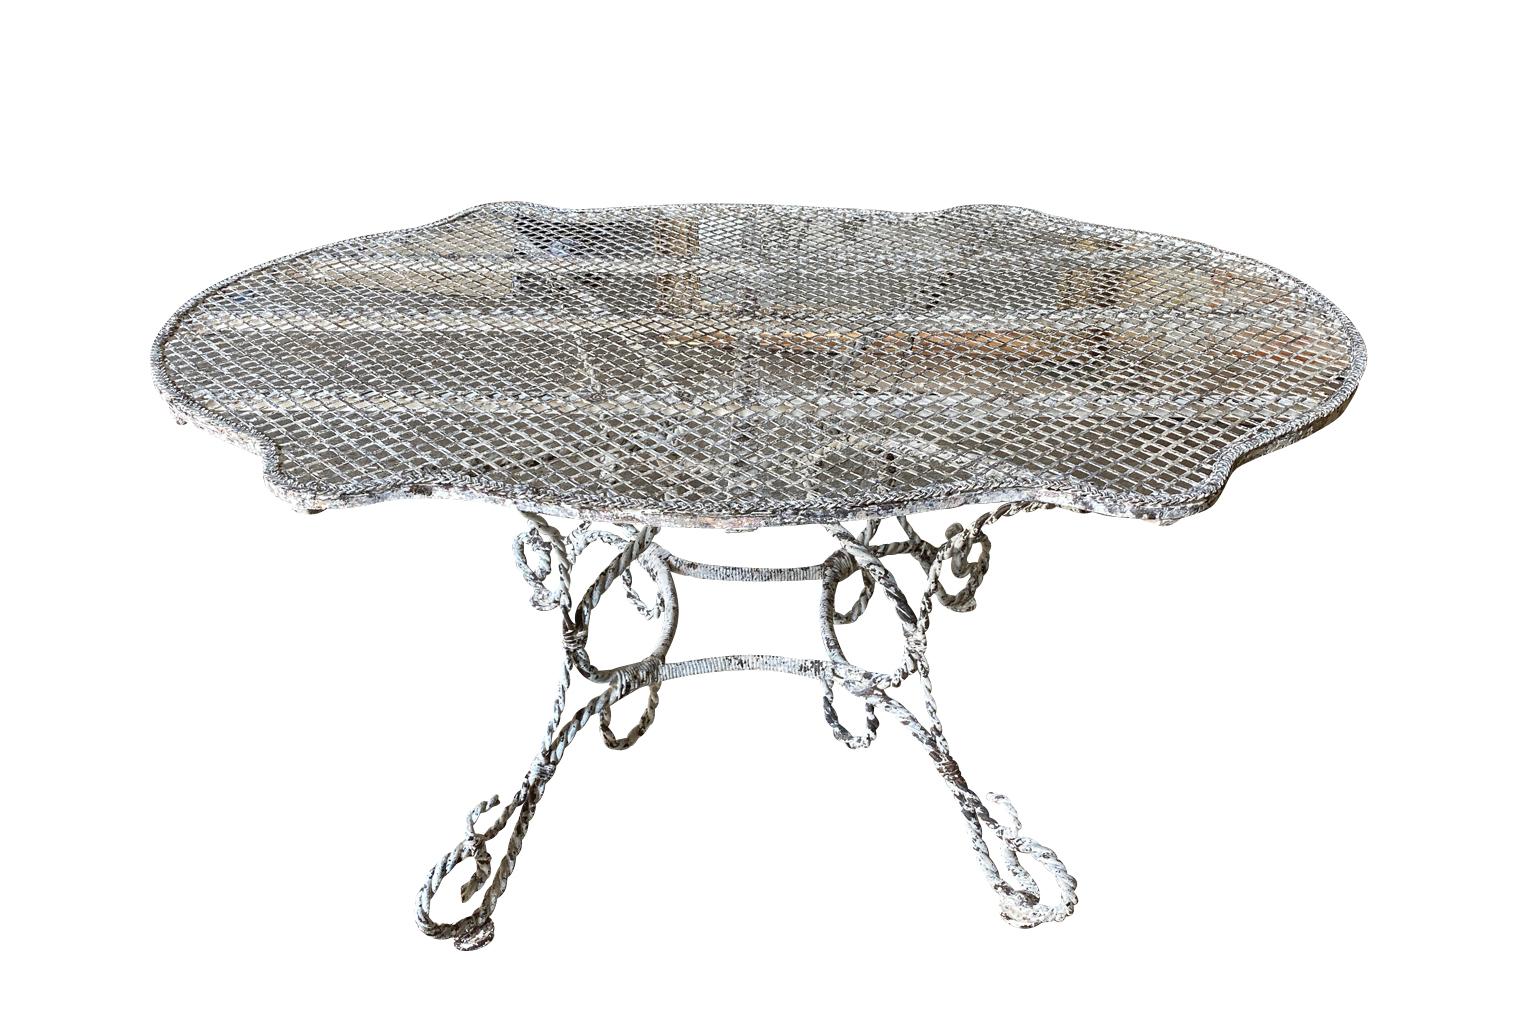 An exceptional 19th century Garden dining table from the Provence region of France. Beautifully constructed from painted iron with a very sculpted form. Perfect for any interior of garden.